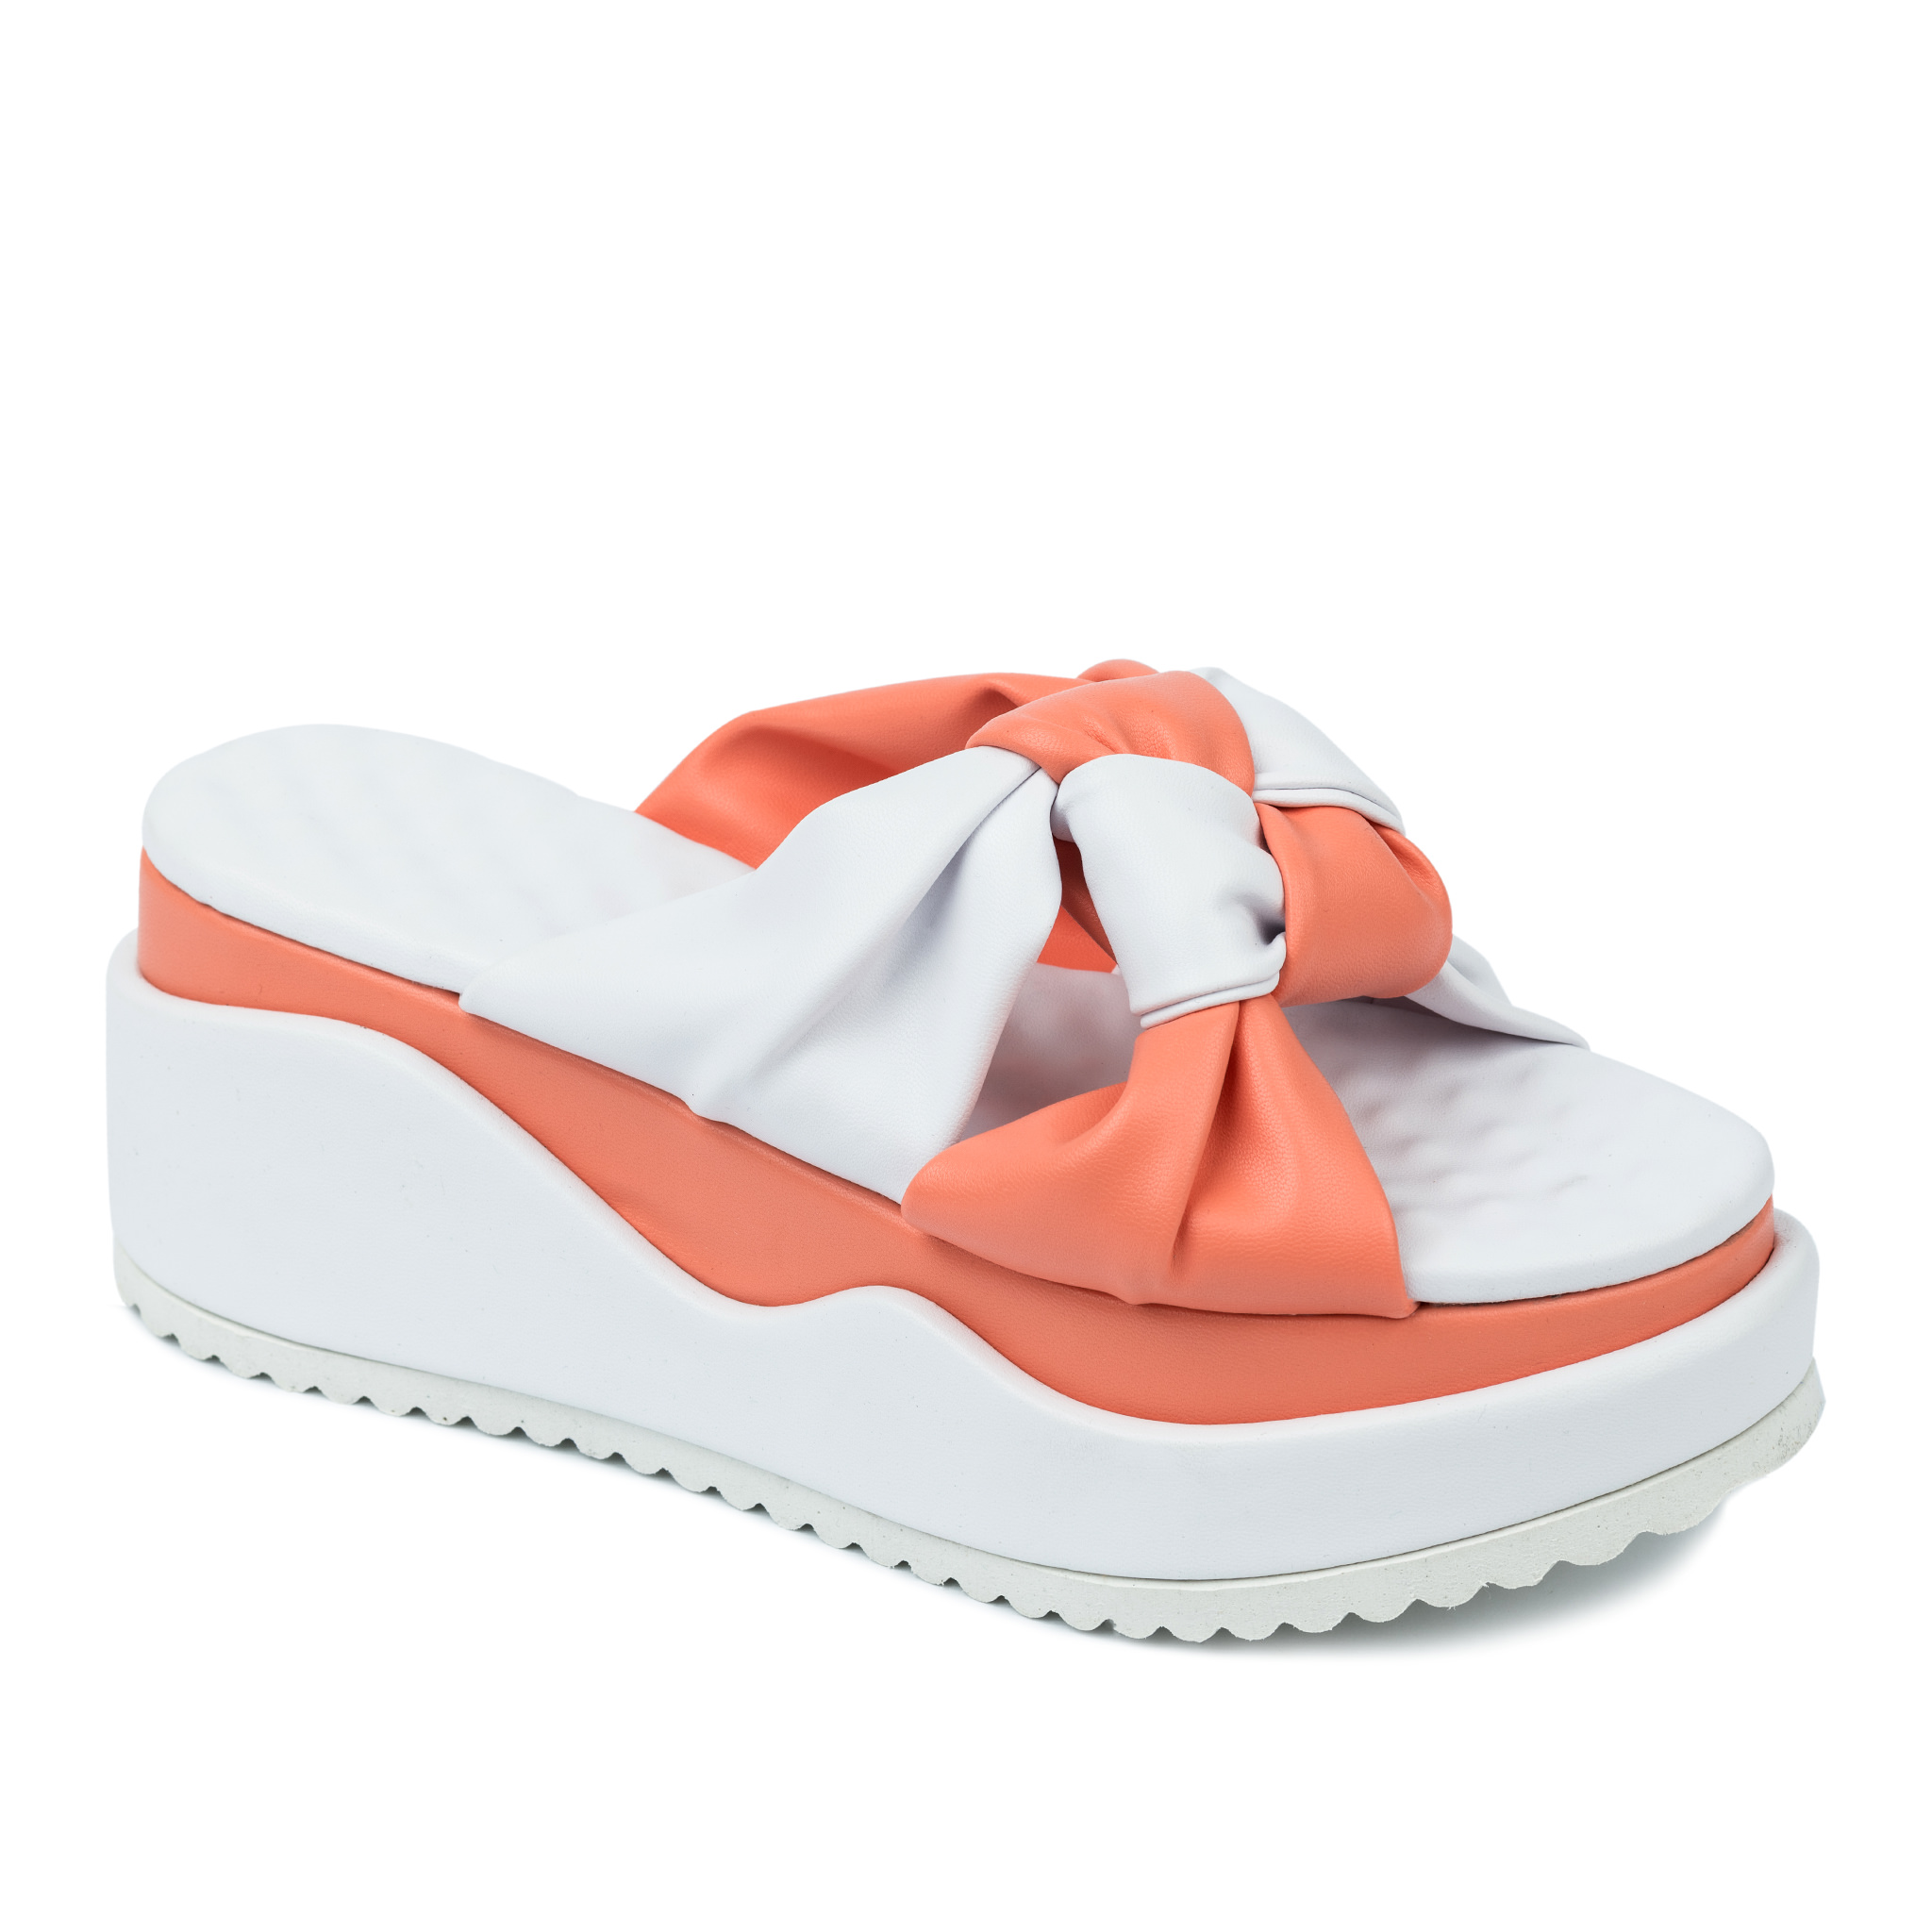 Women Slippers and Mules A308 - ORANGE